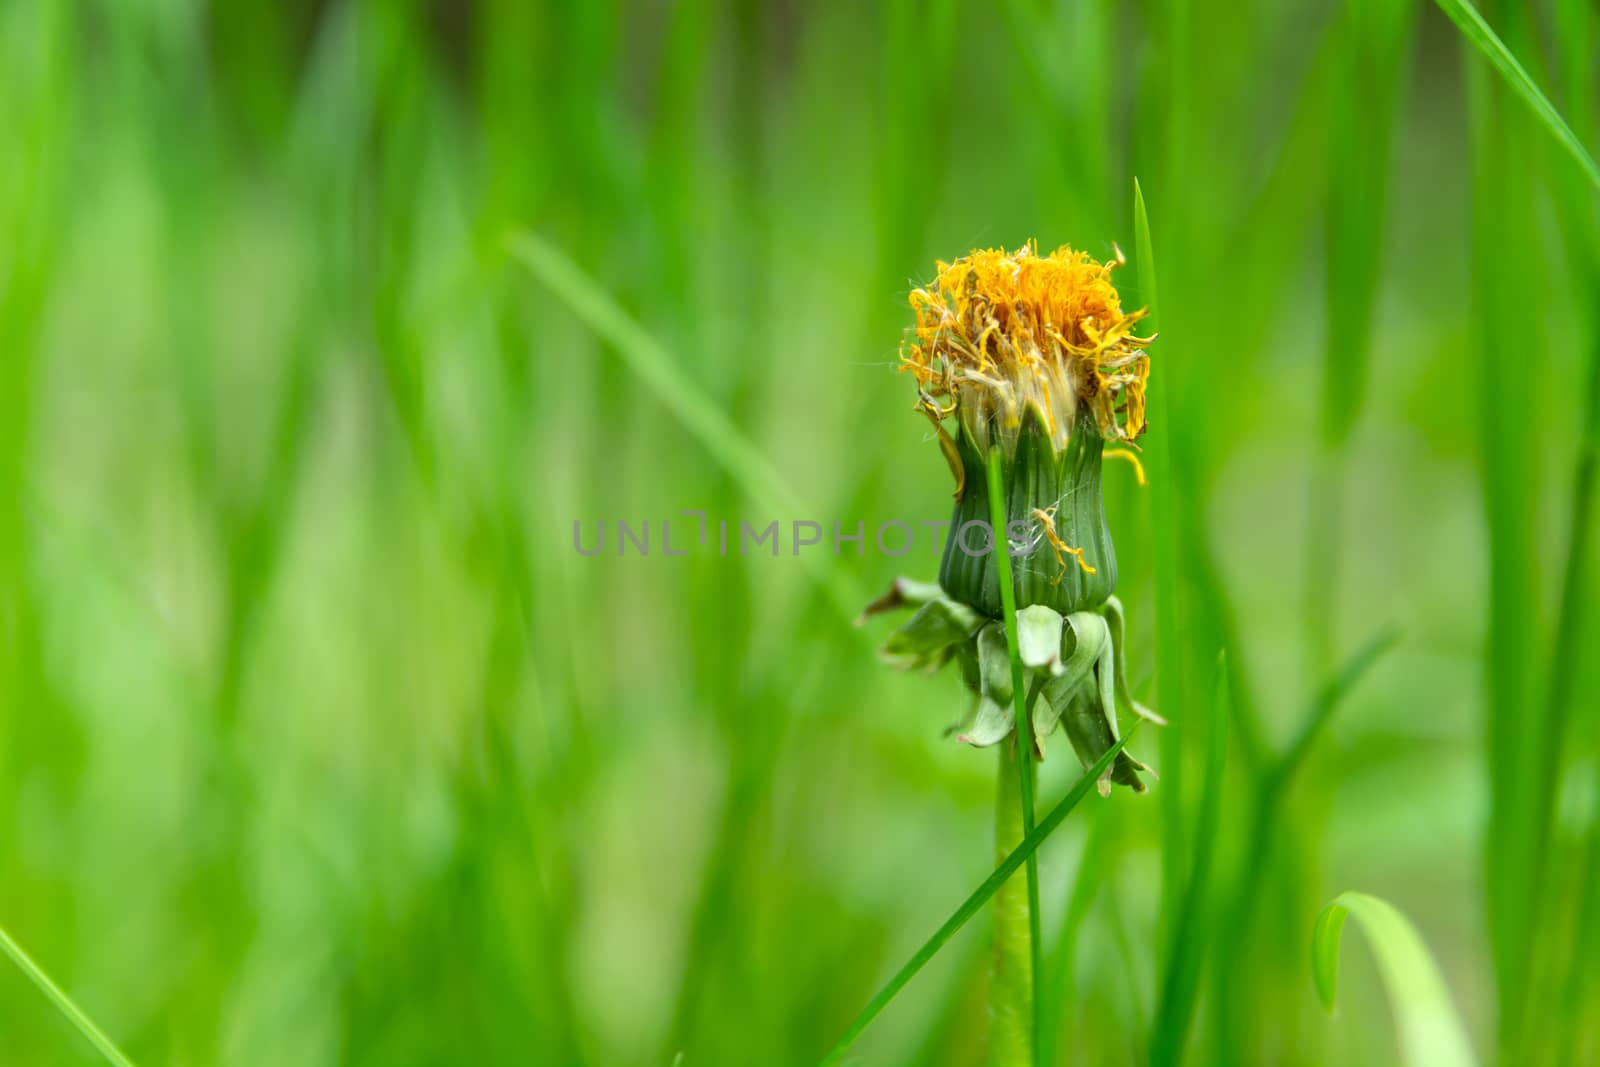 Faded flower of a dandelion against a background of green grass, summer view